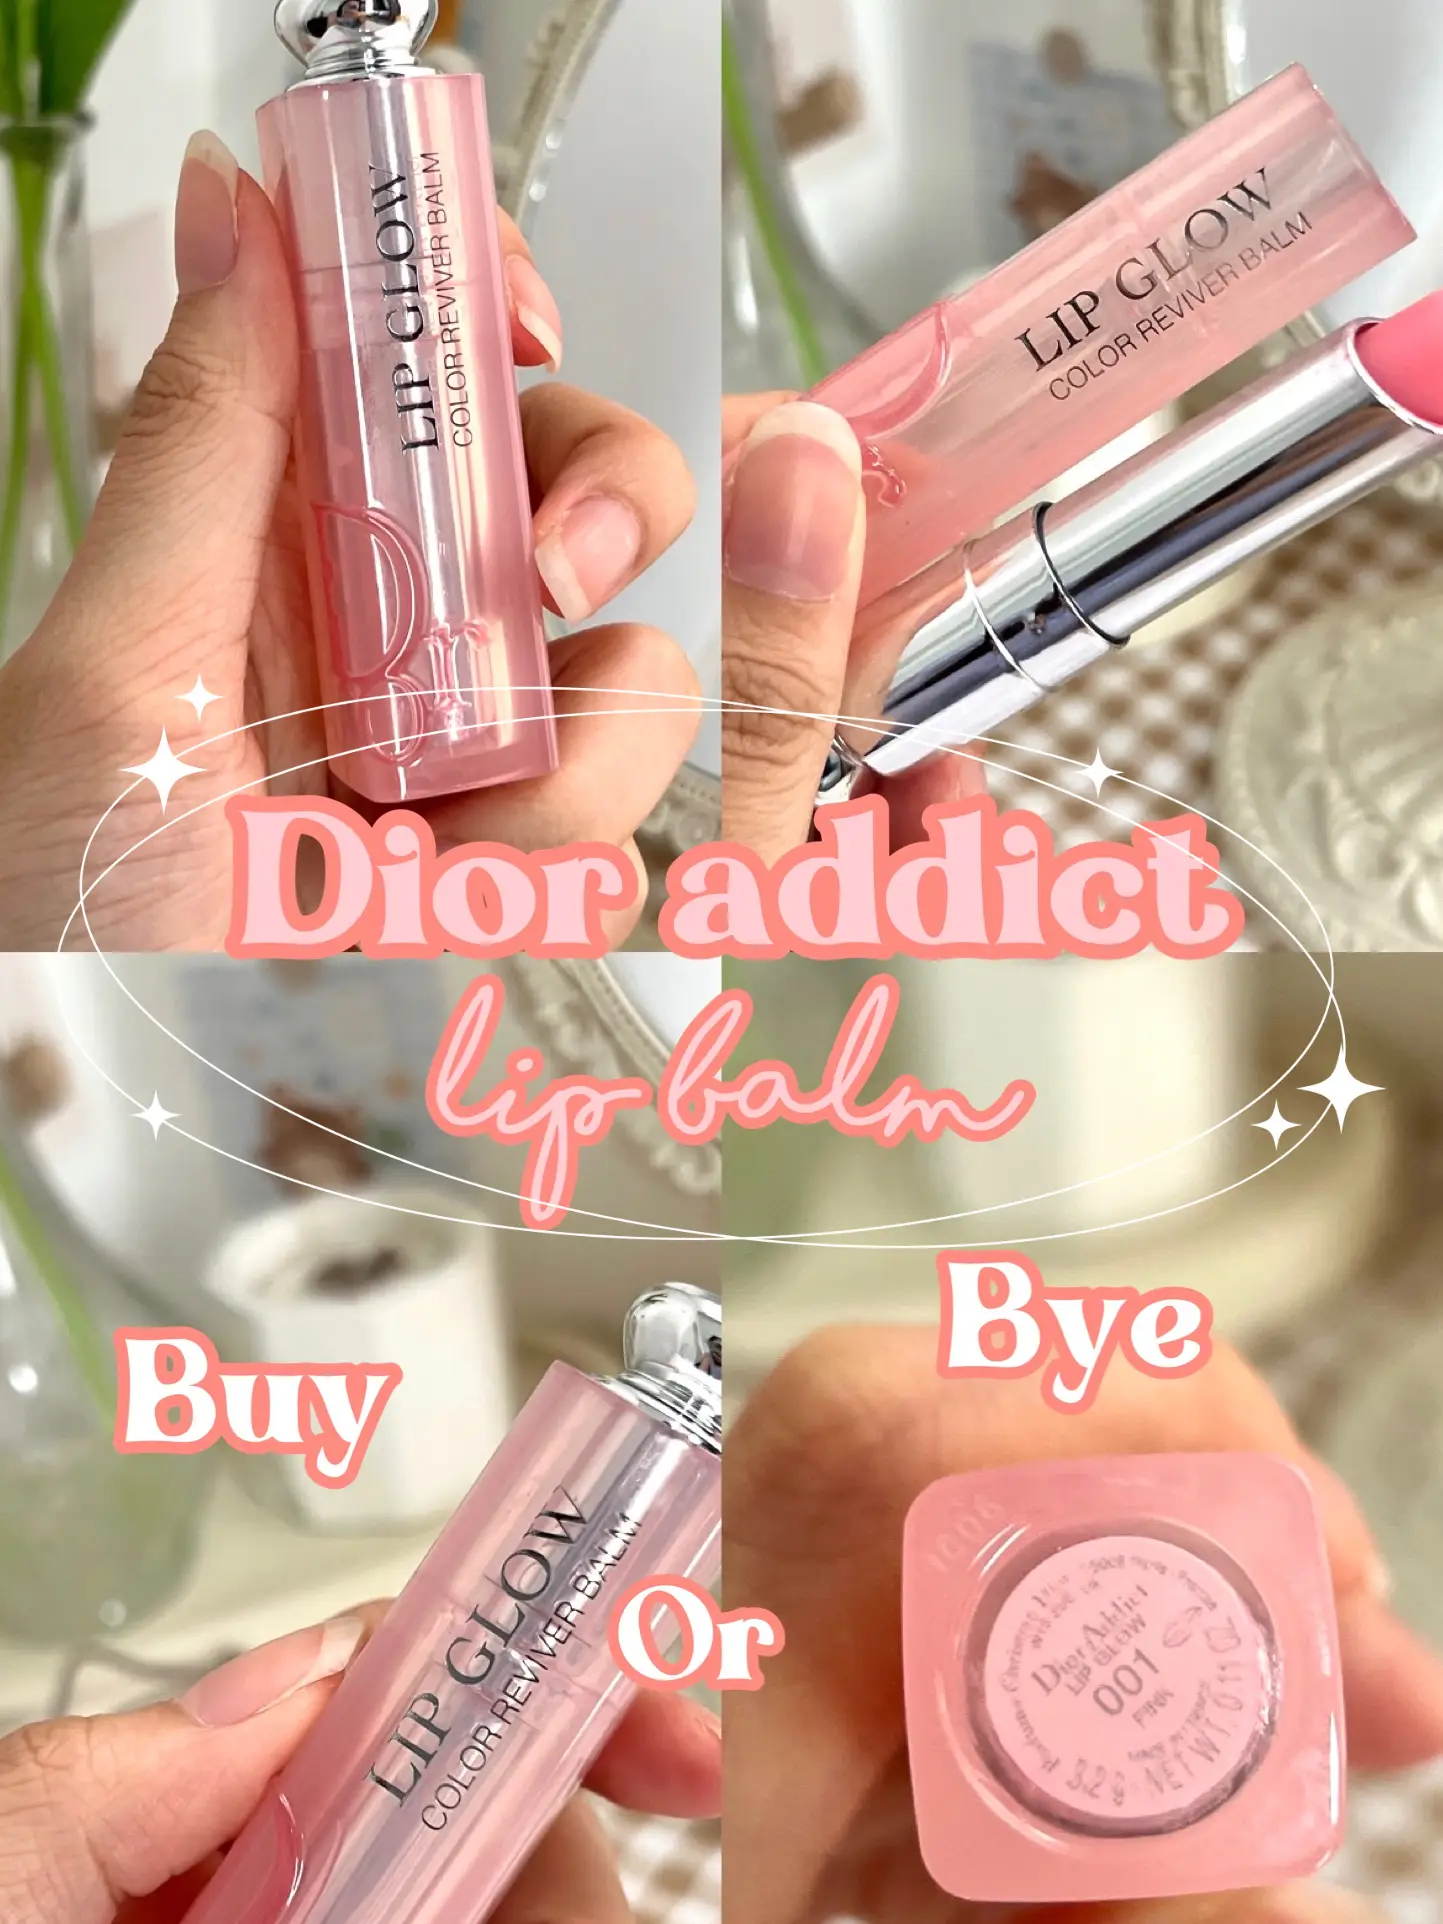 Dior Addict ✨ Gallery by BUY Lip BYE? 𝓙𝓸𝓬𝓮𝓵𝔂𝓷✨ posted Balm OR | | Lemon8